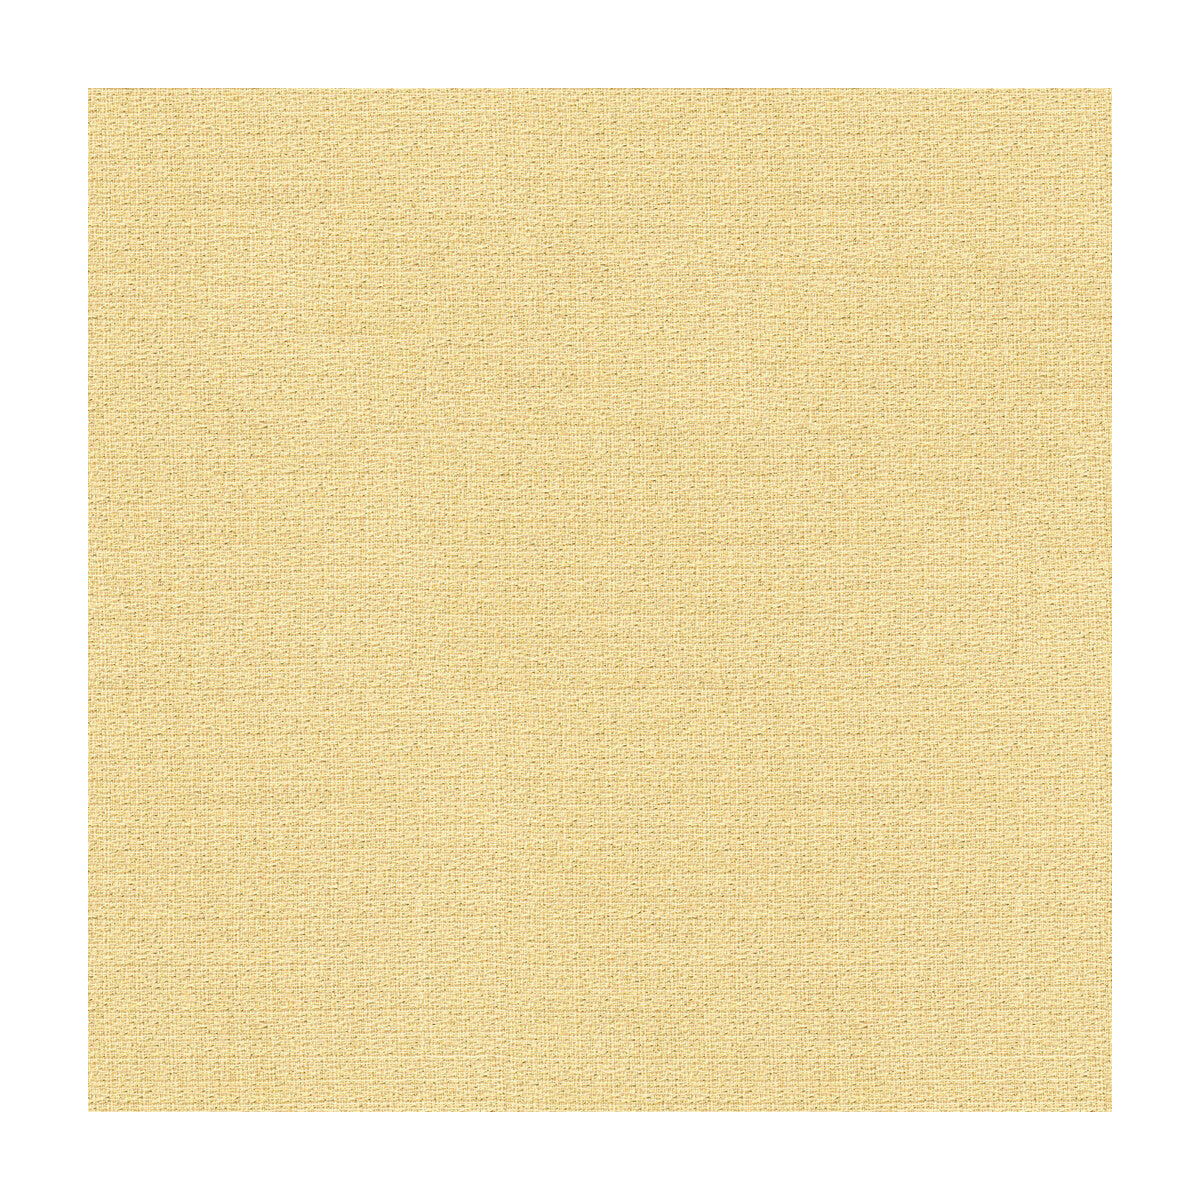 Glisten Wool fabric in ivory/gold color - pattern GWF-3045.416.0 - by Lee Jofa Modern in the Ventana Sheers collection